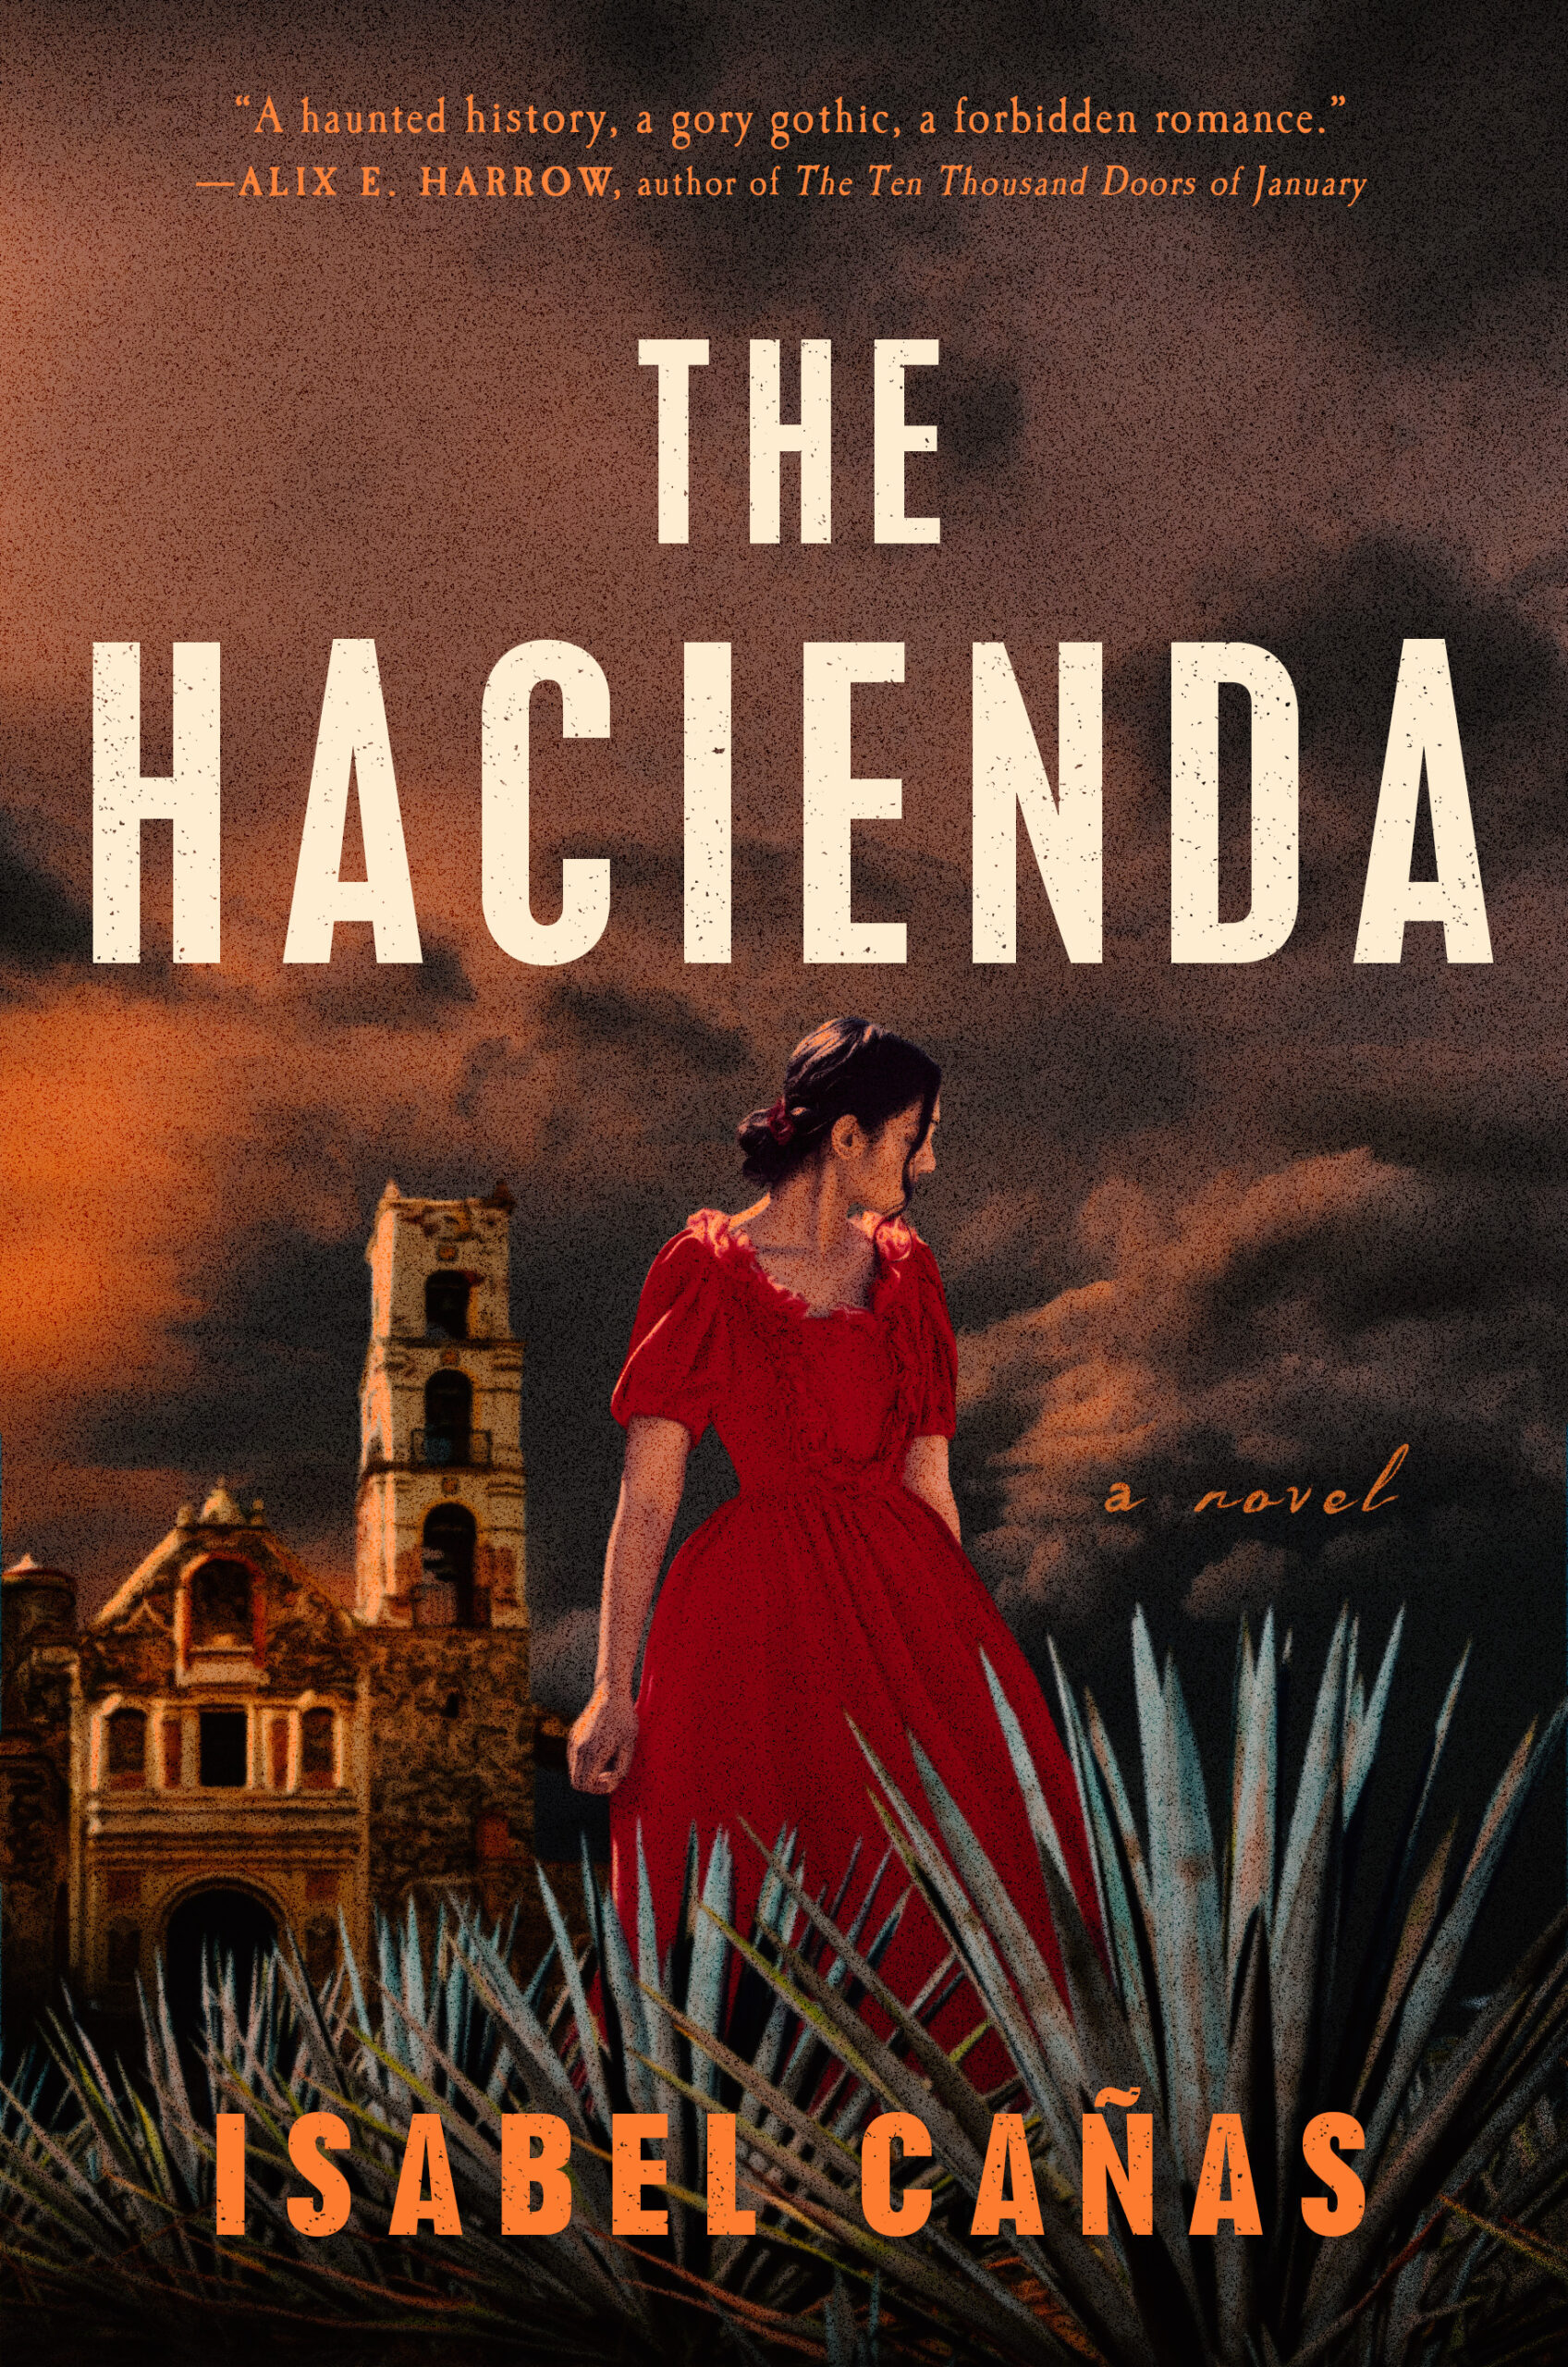 The Hacienda by Isabel Cañas book cover